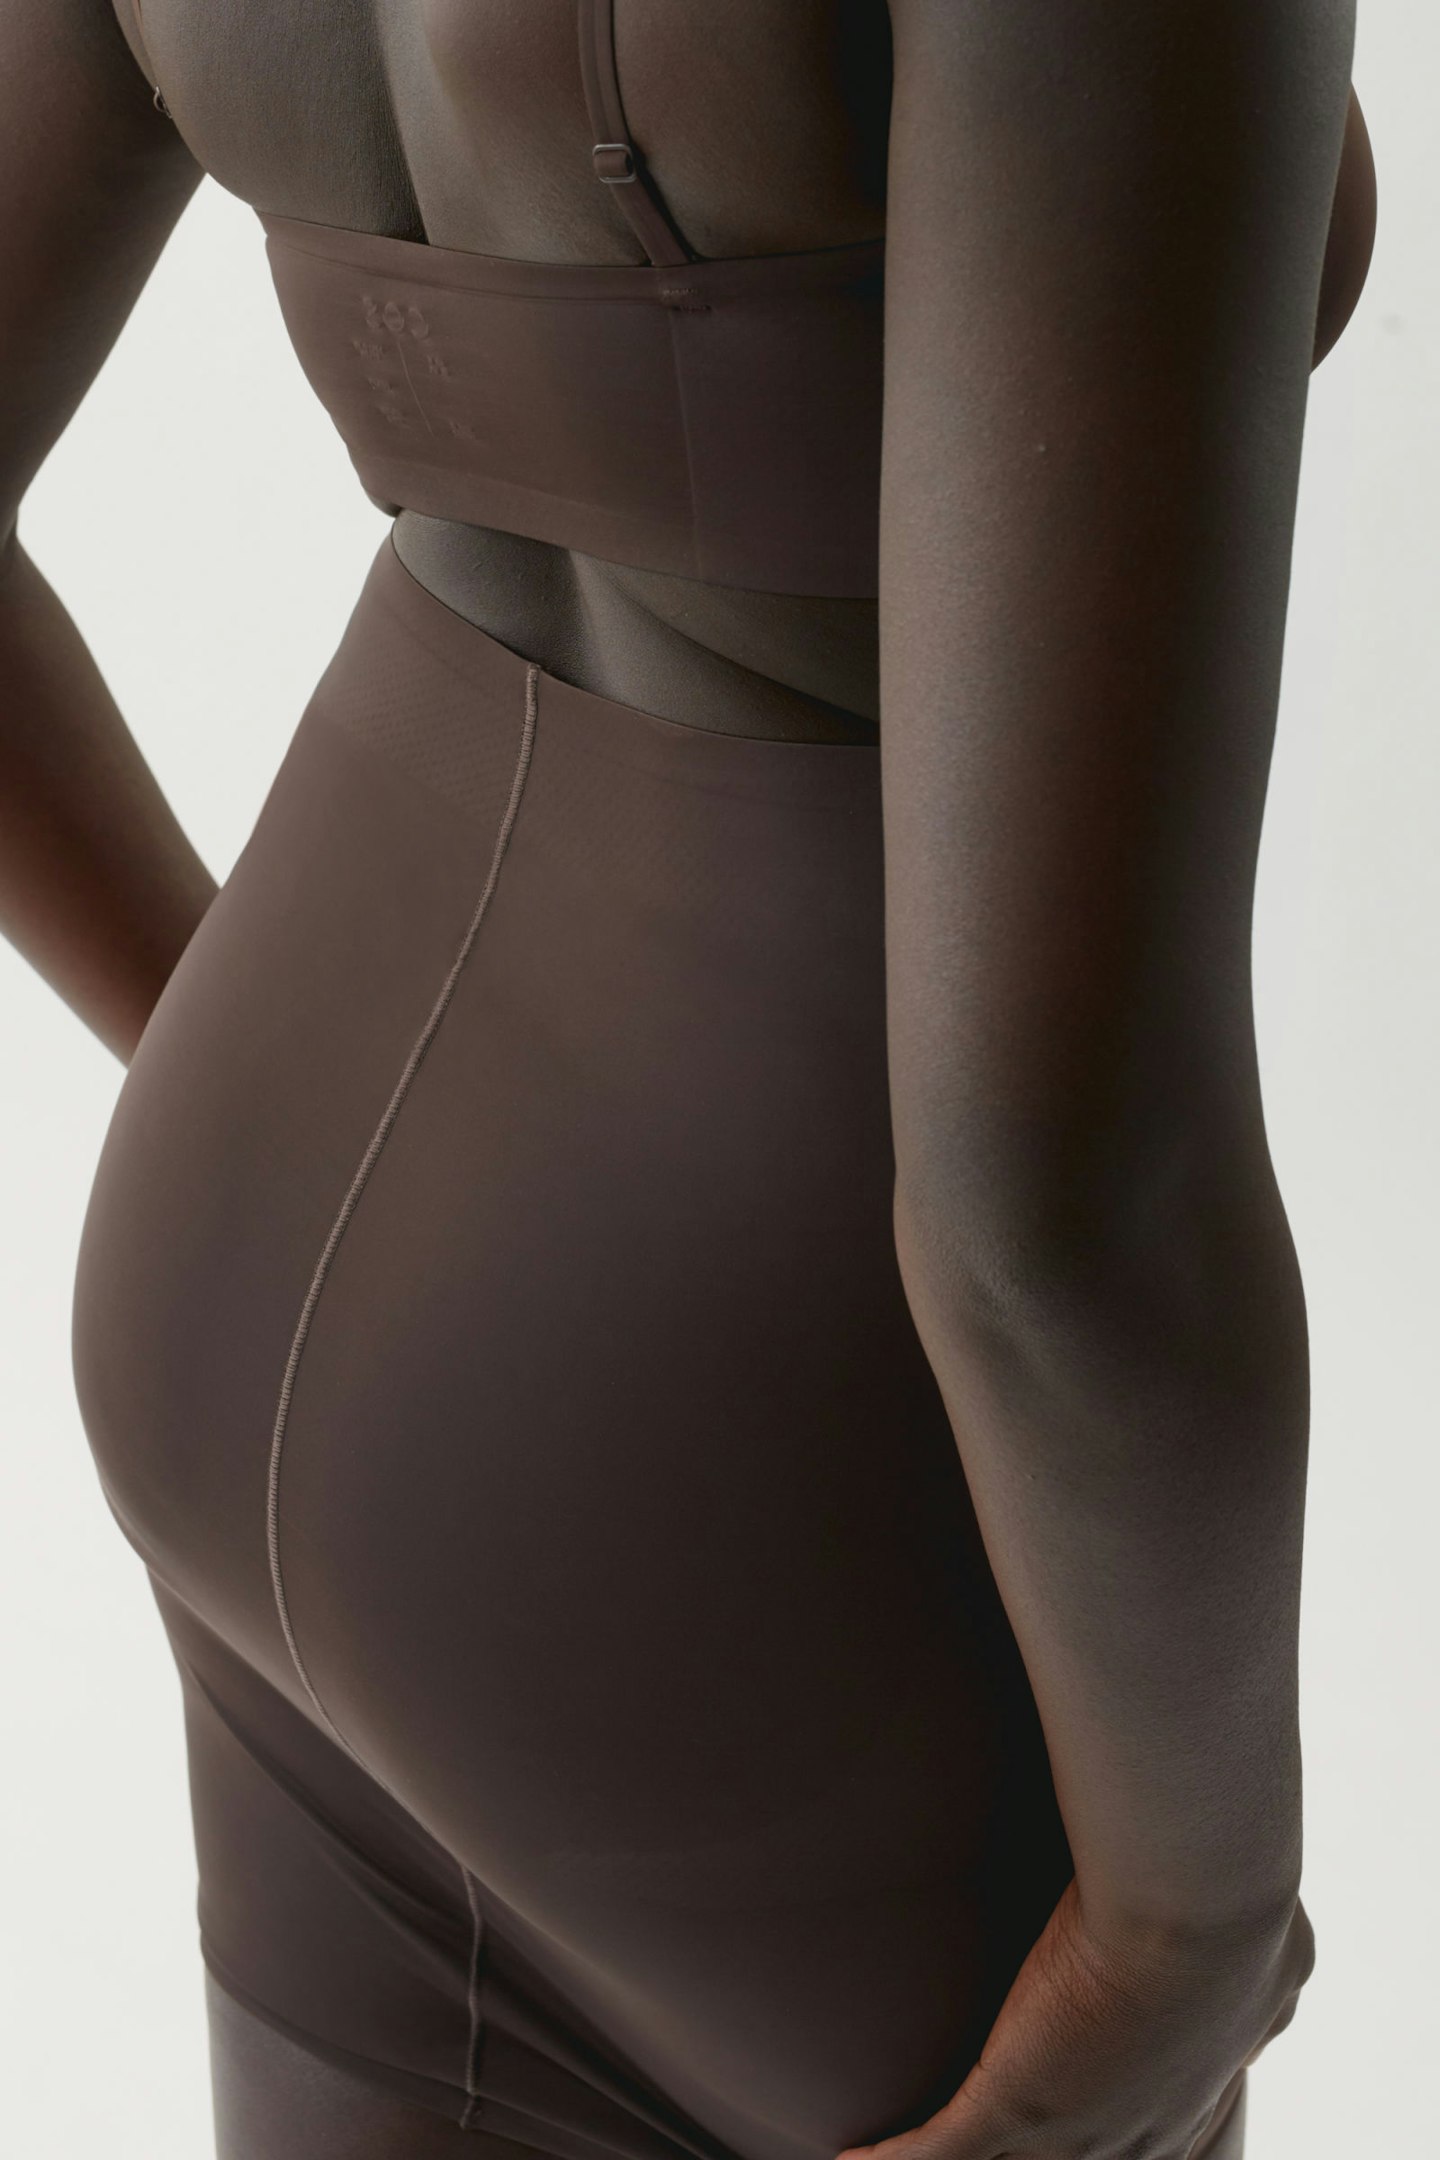 COS, Sculpt Recycled Underskirt, WAS £39 NOW £19.50